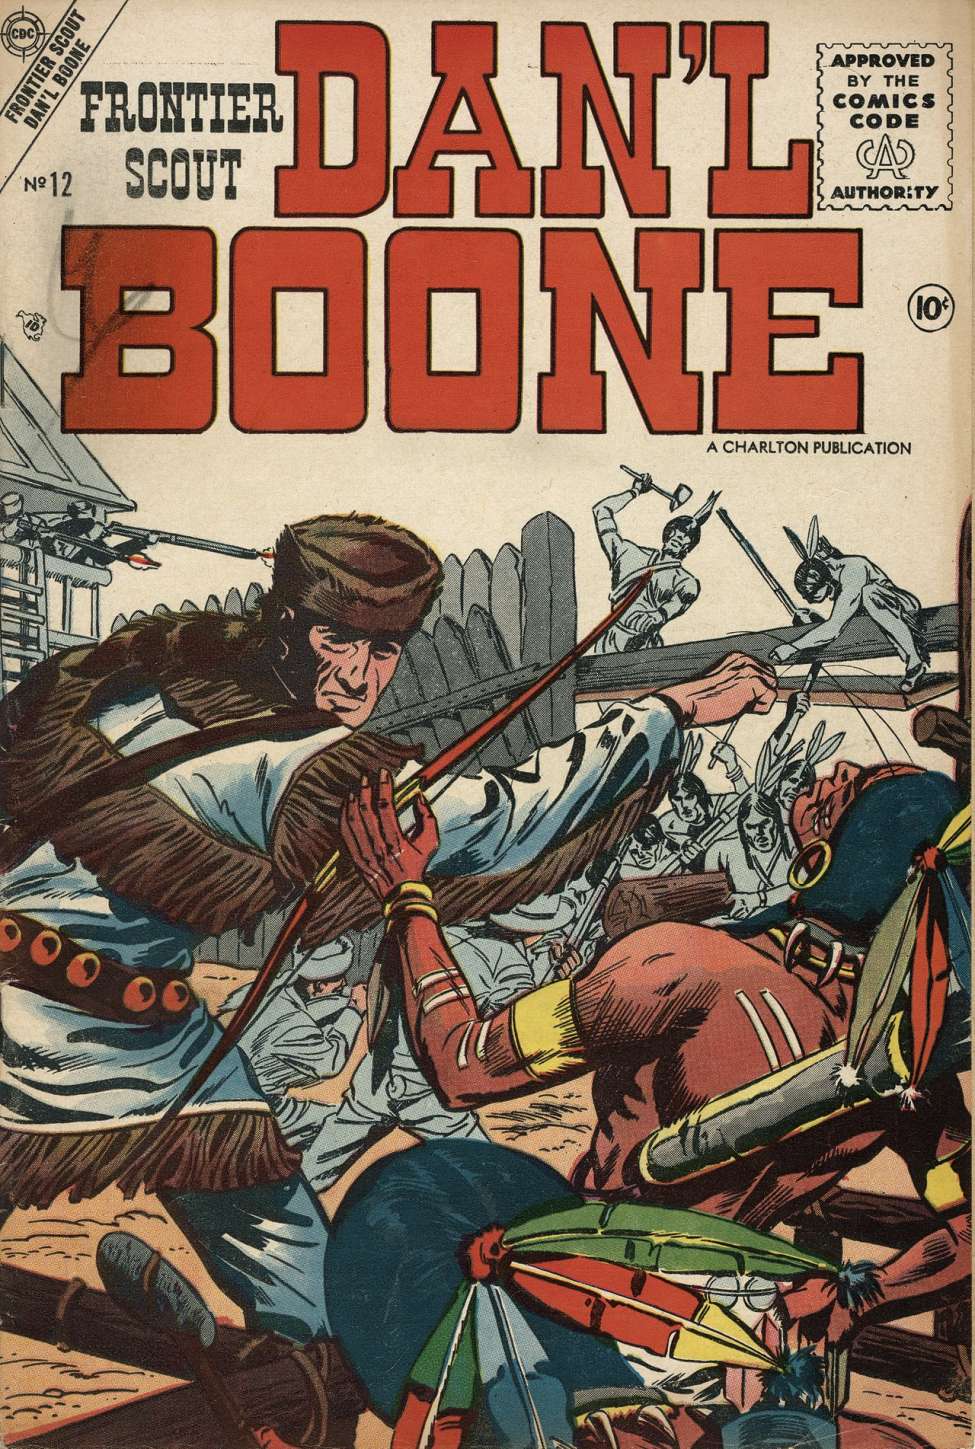 Book Cover For Frontier Scout, Dan'l Boone 12